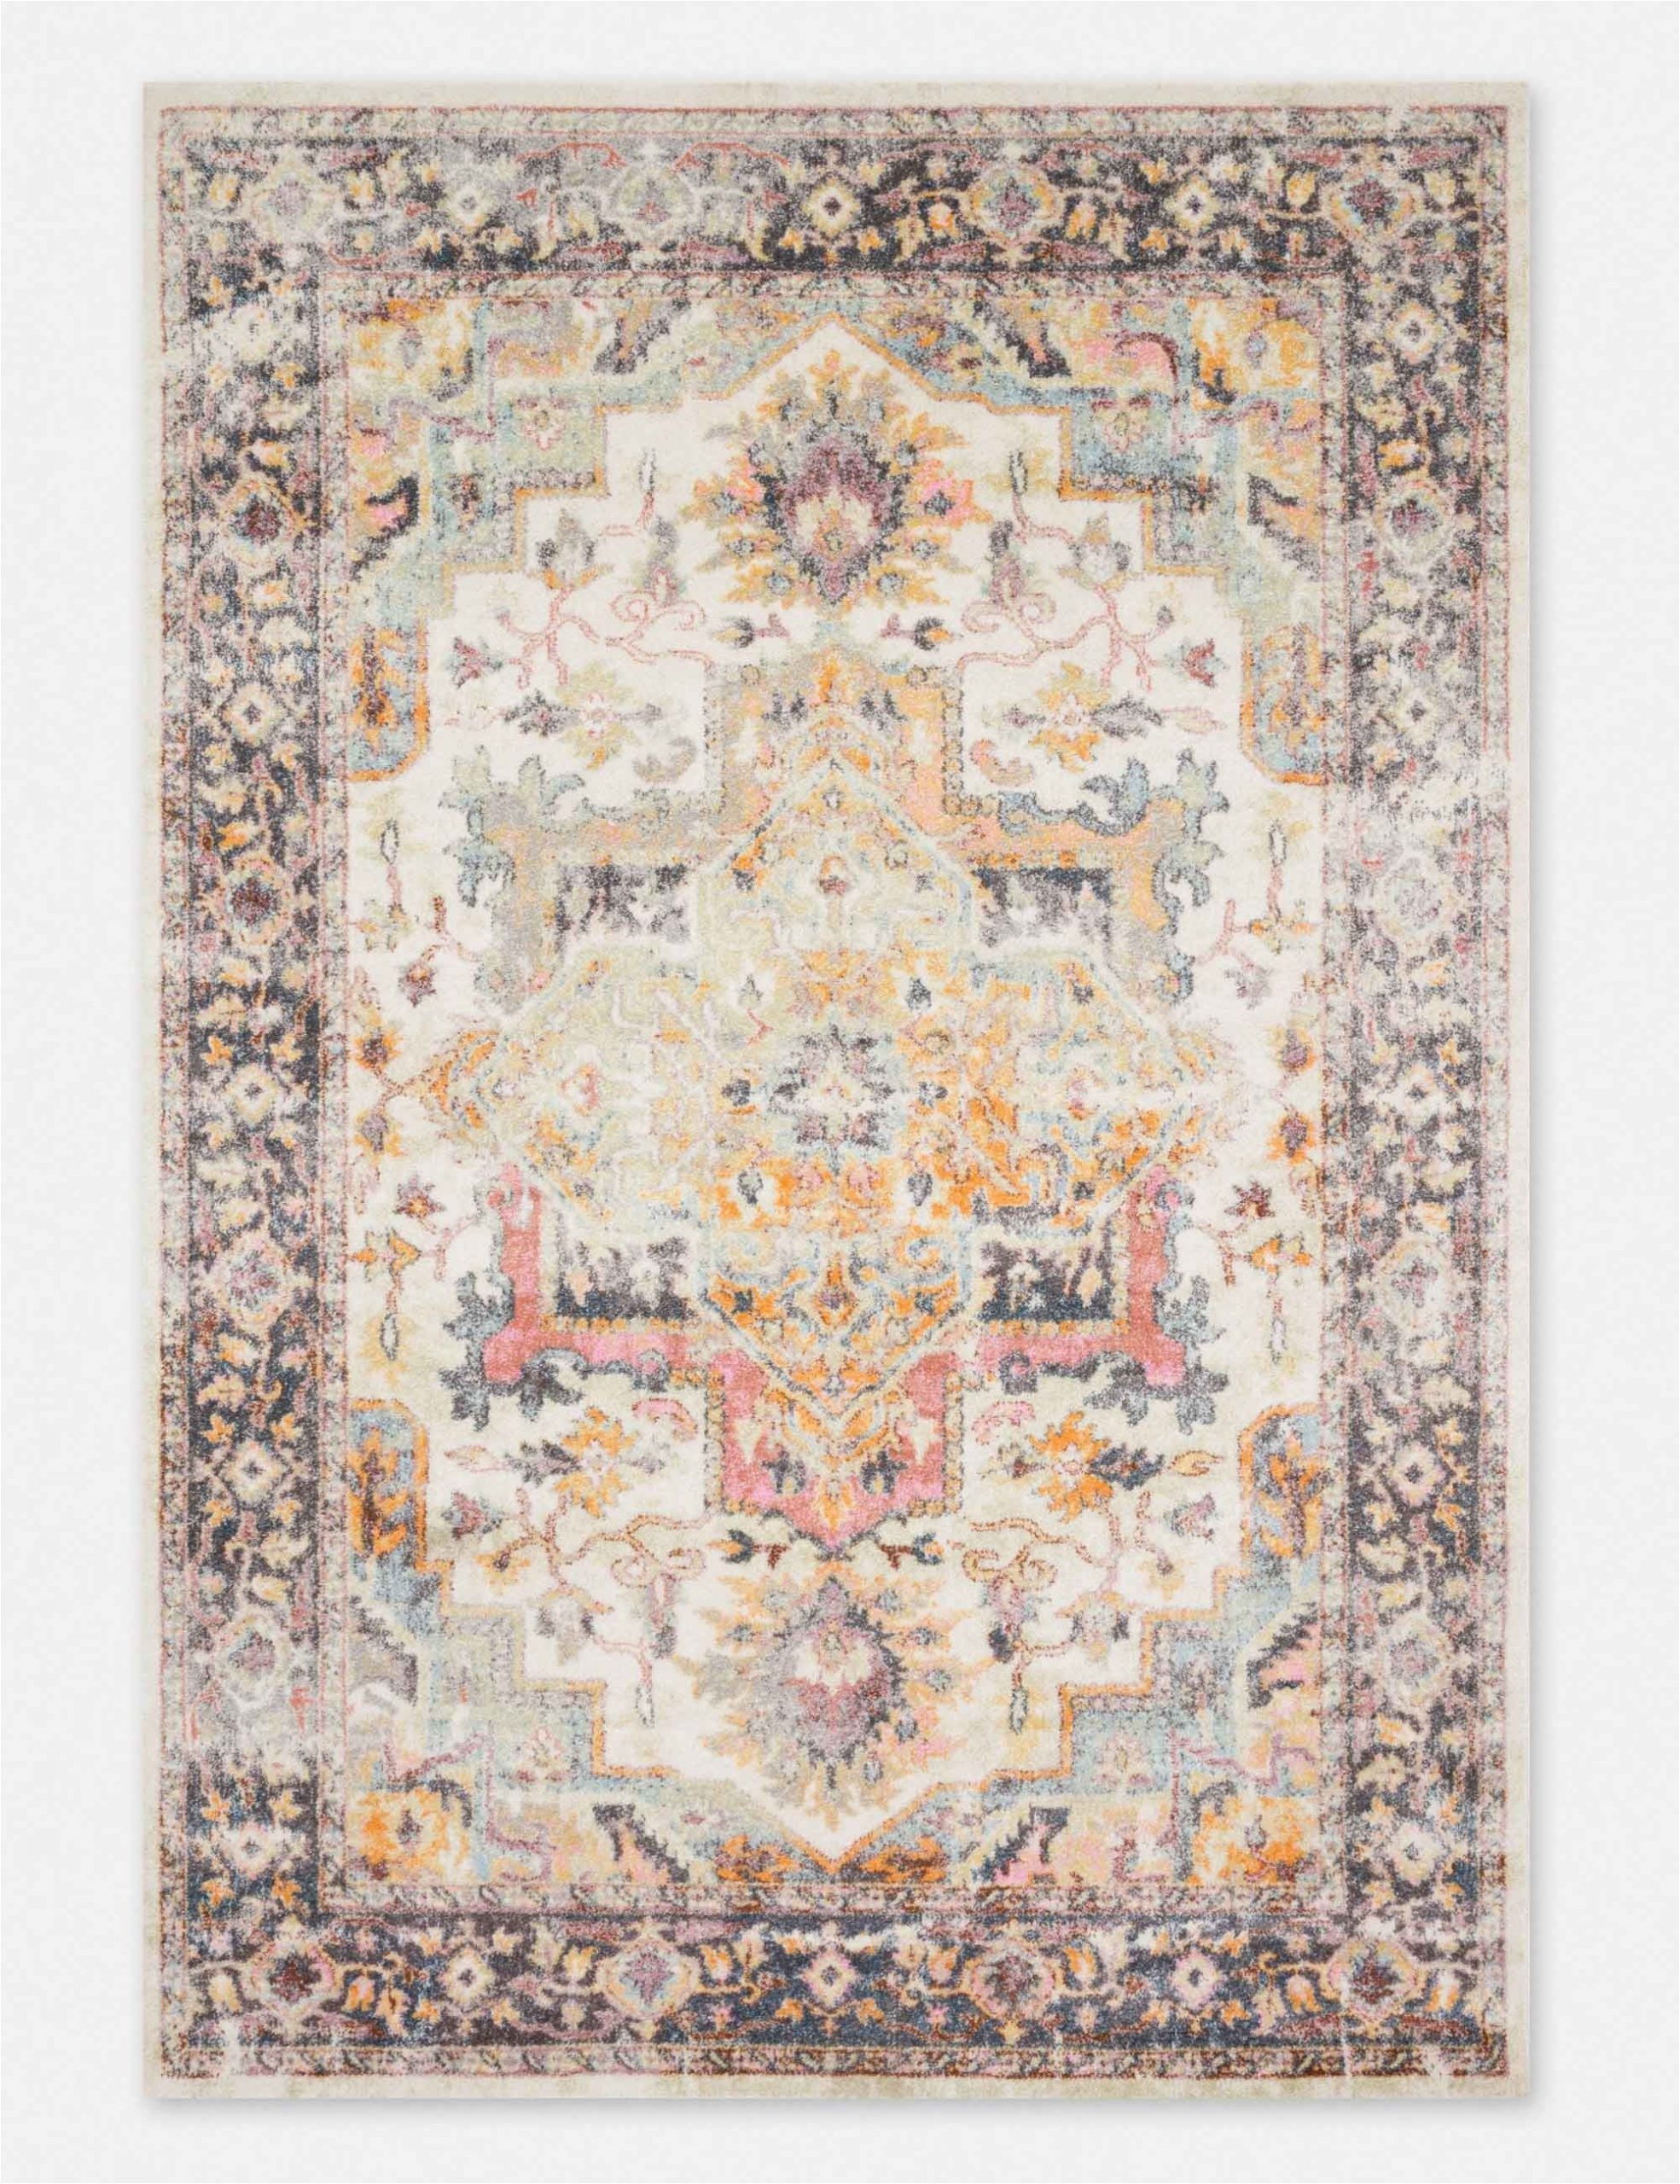 Better Homes and Gardens Overlapping Medallion area Rug This Rug S Floral Medallion Motifs and Warm Modest tones